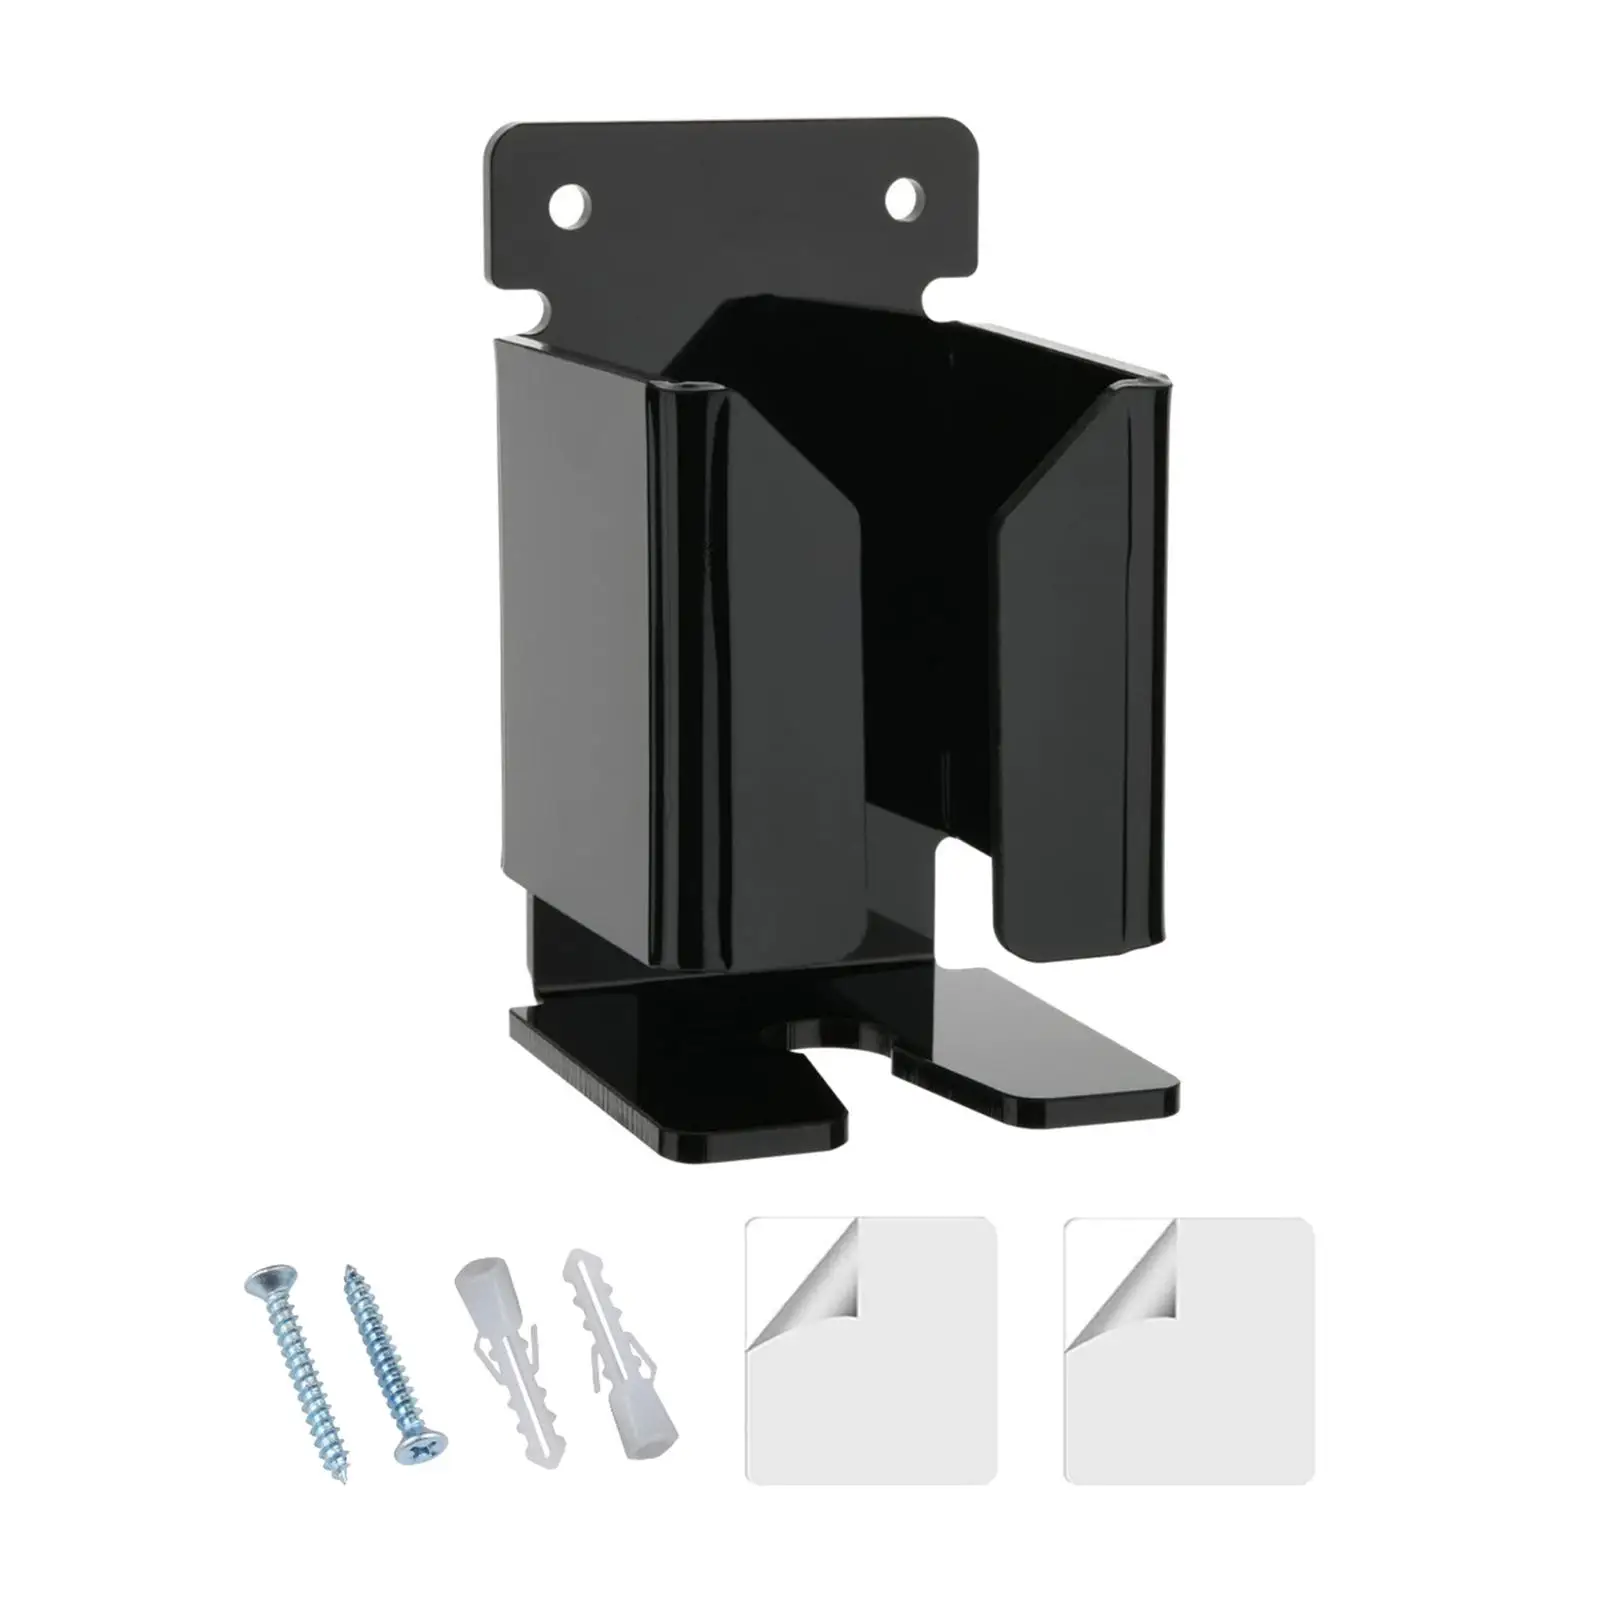 Electric Shaver Wall Holder Stand Shaver Hanger Shaver Organizer for Electric Shaver